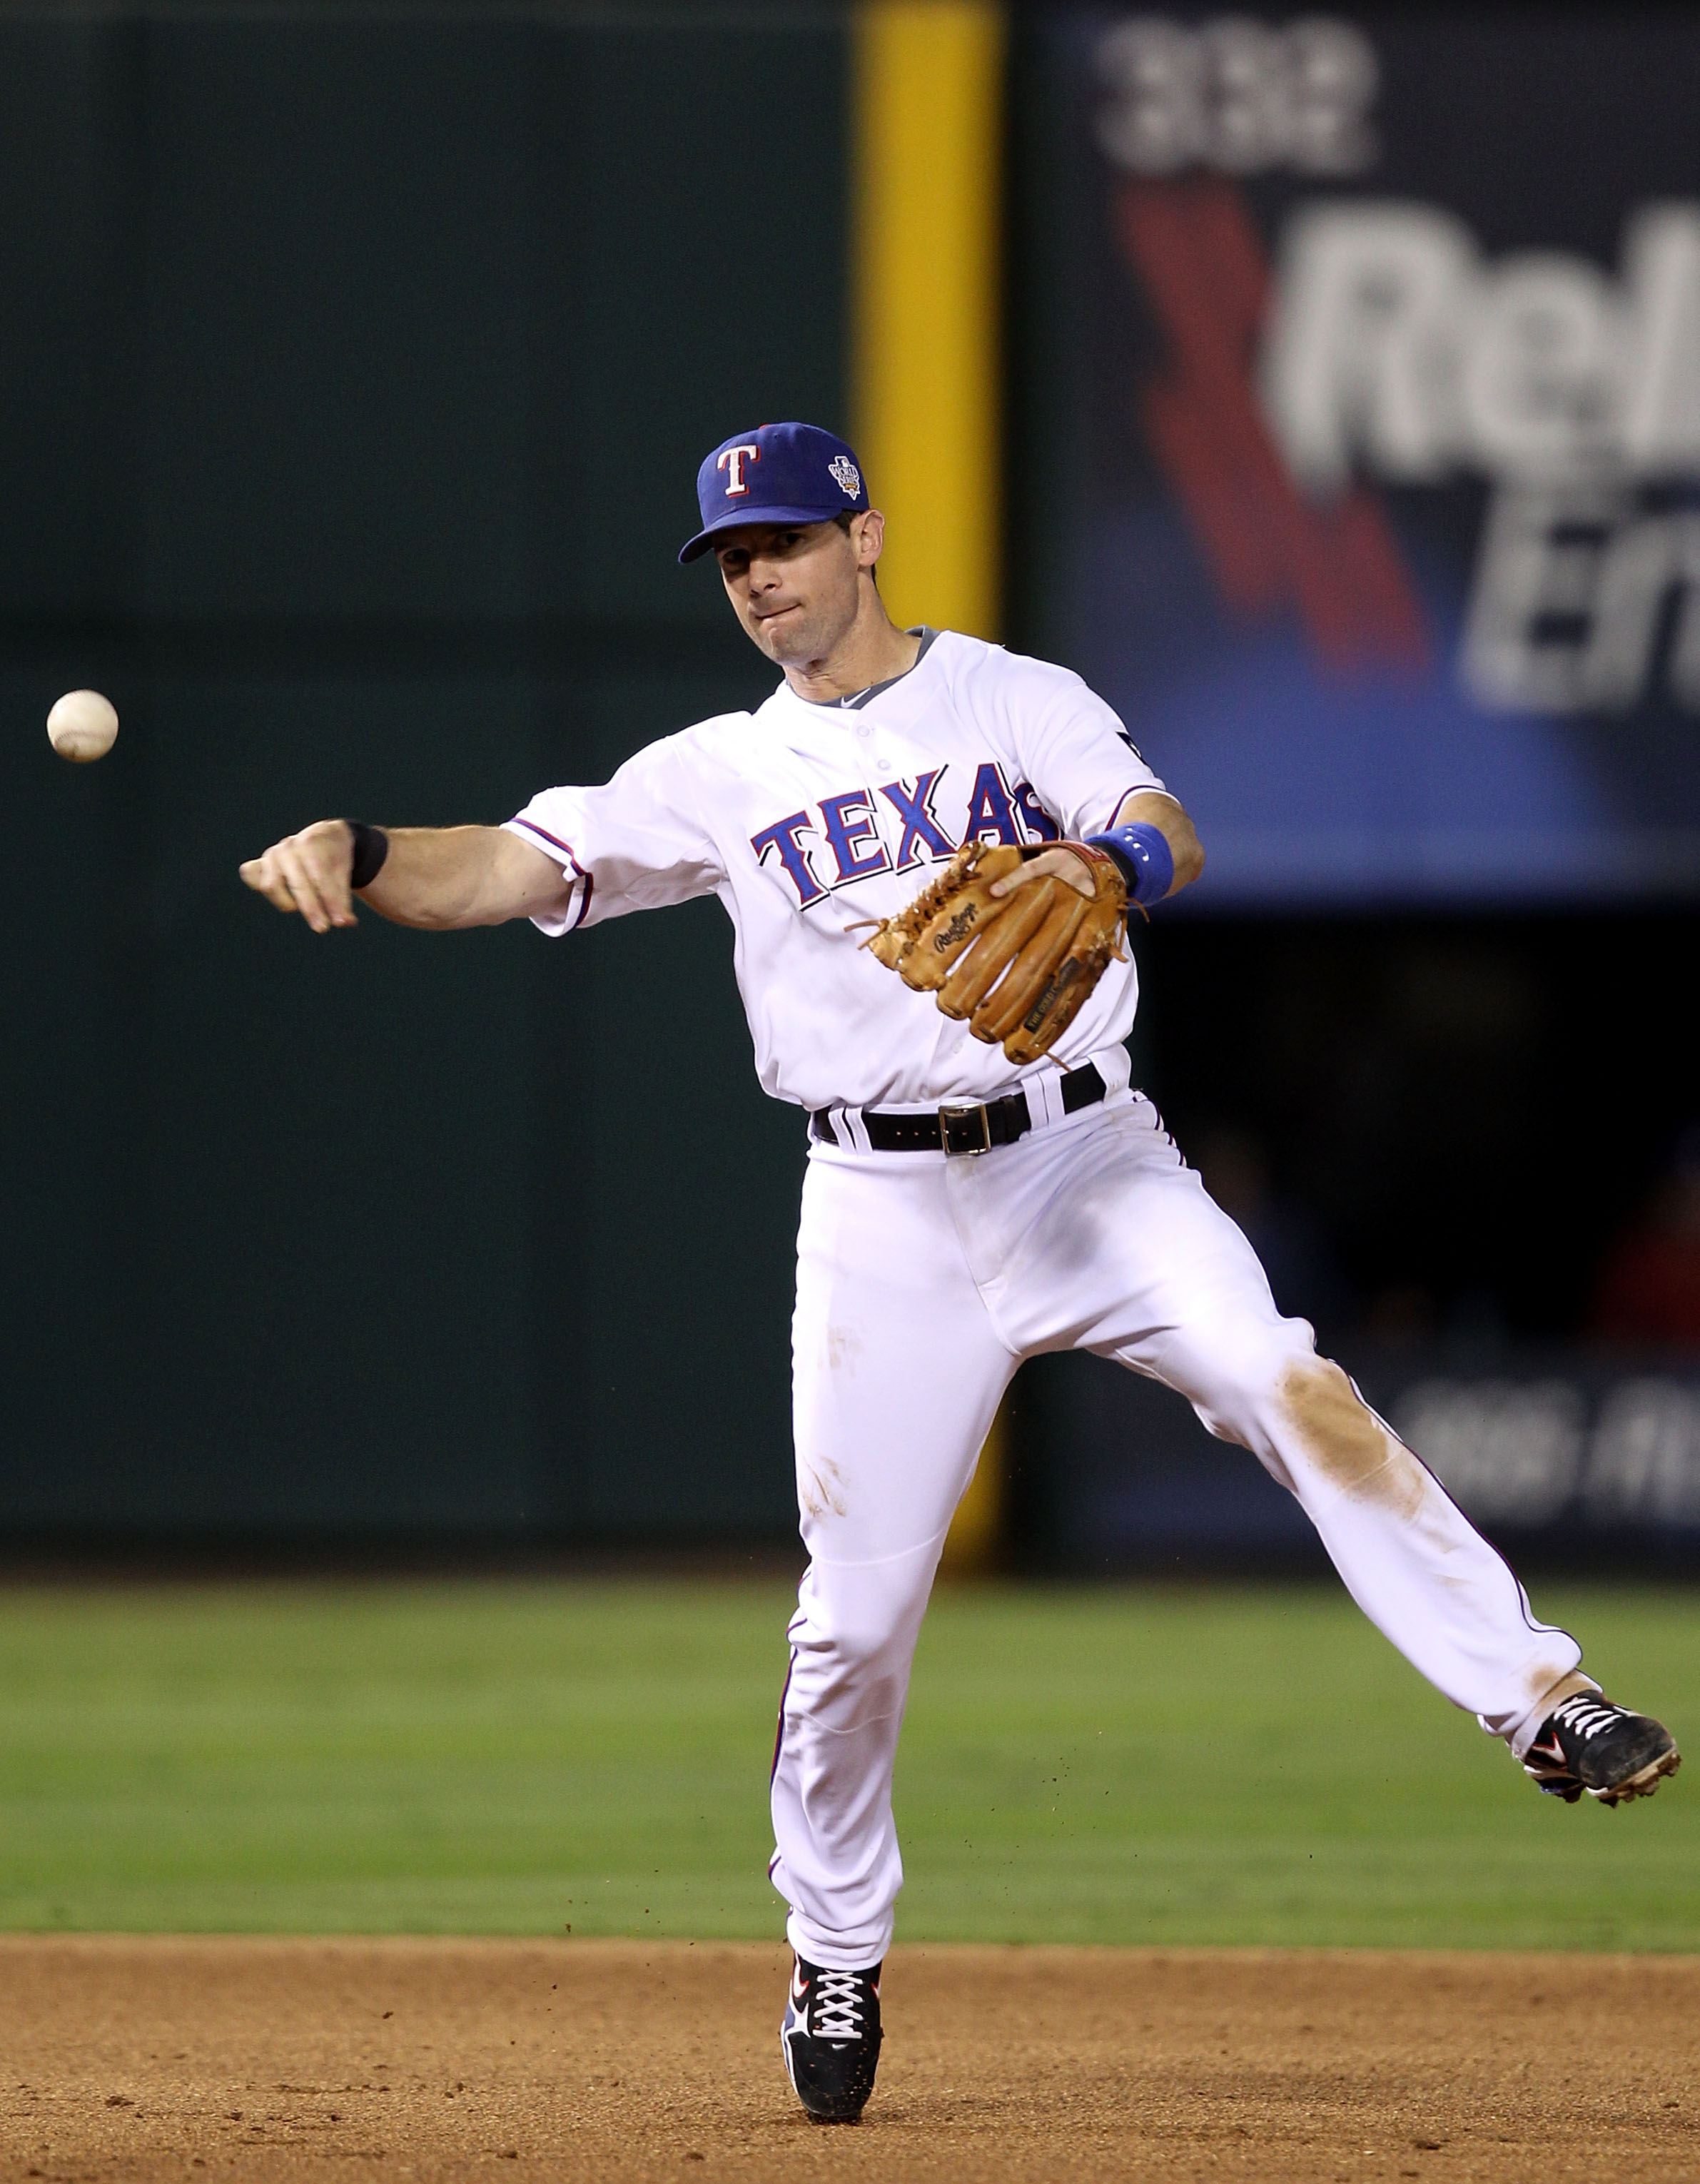 Michael Young won't participate in the World Baseball Classic